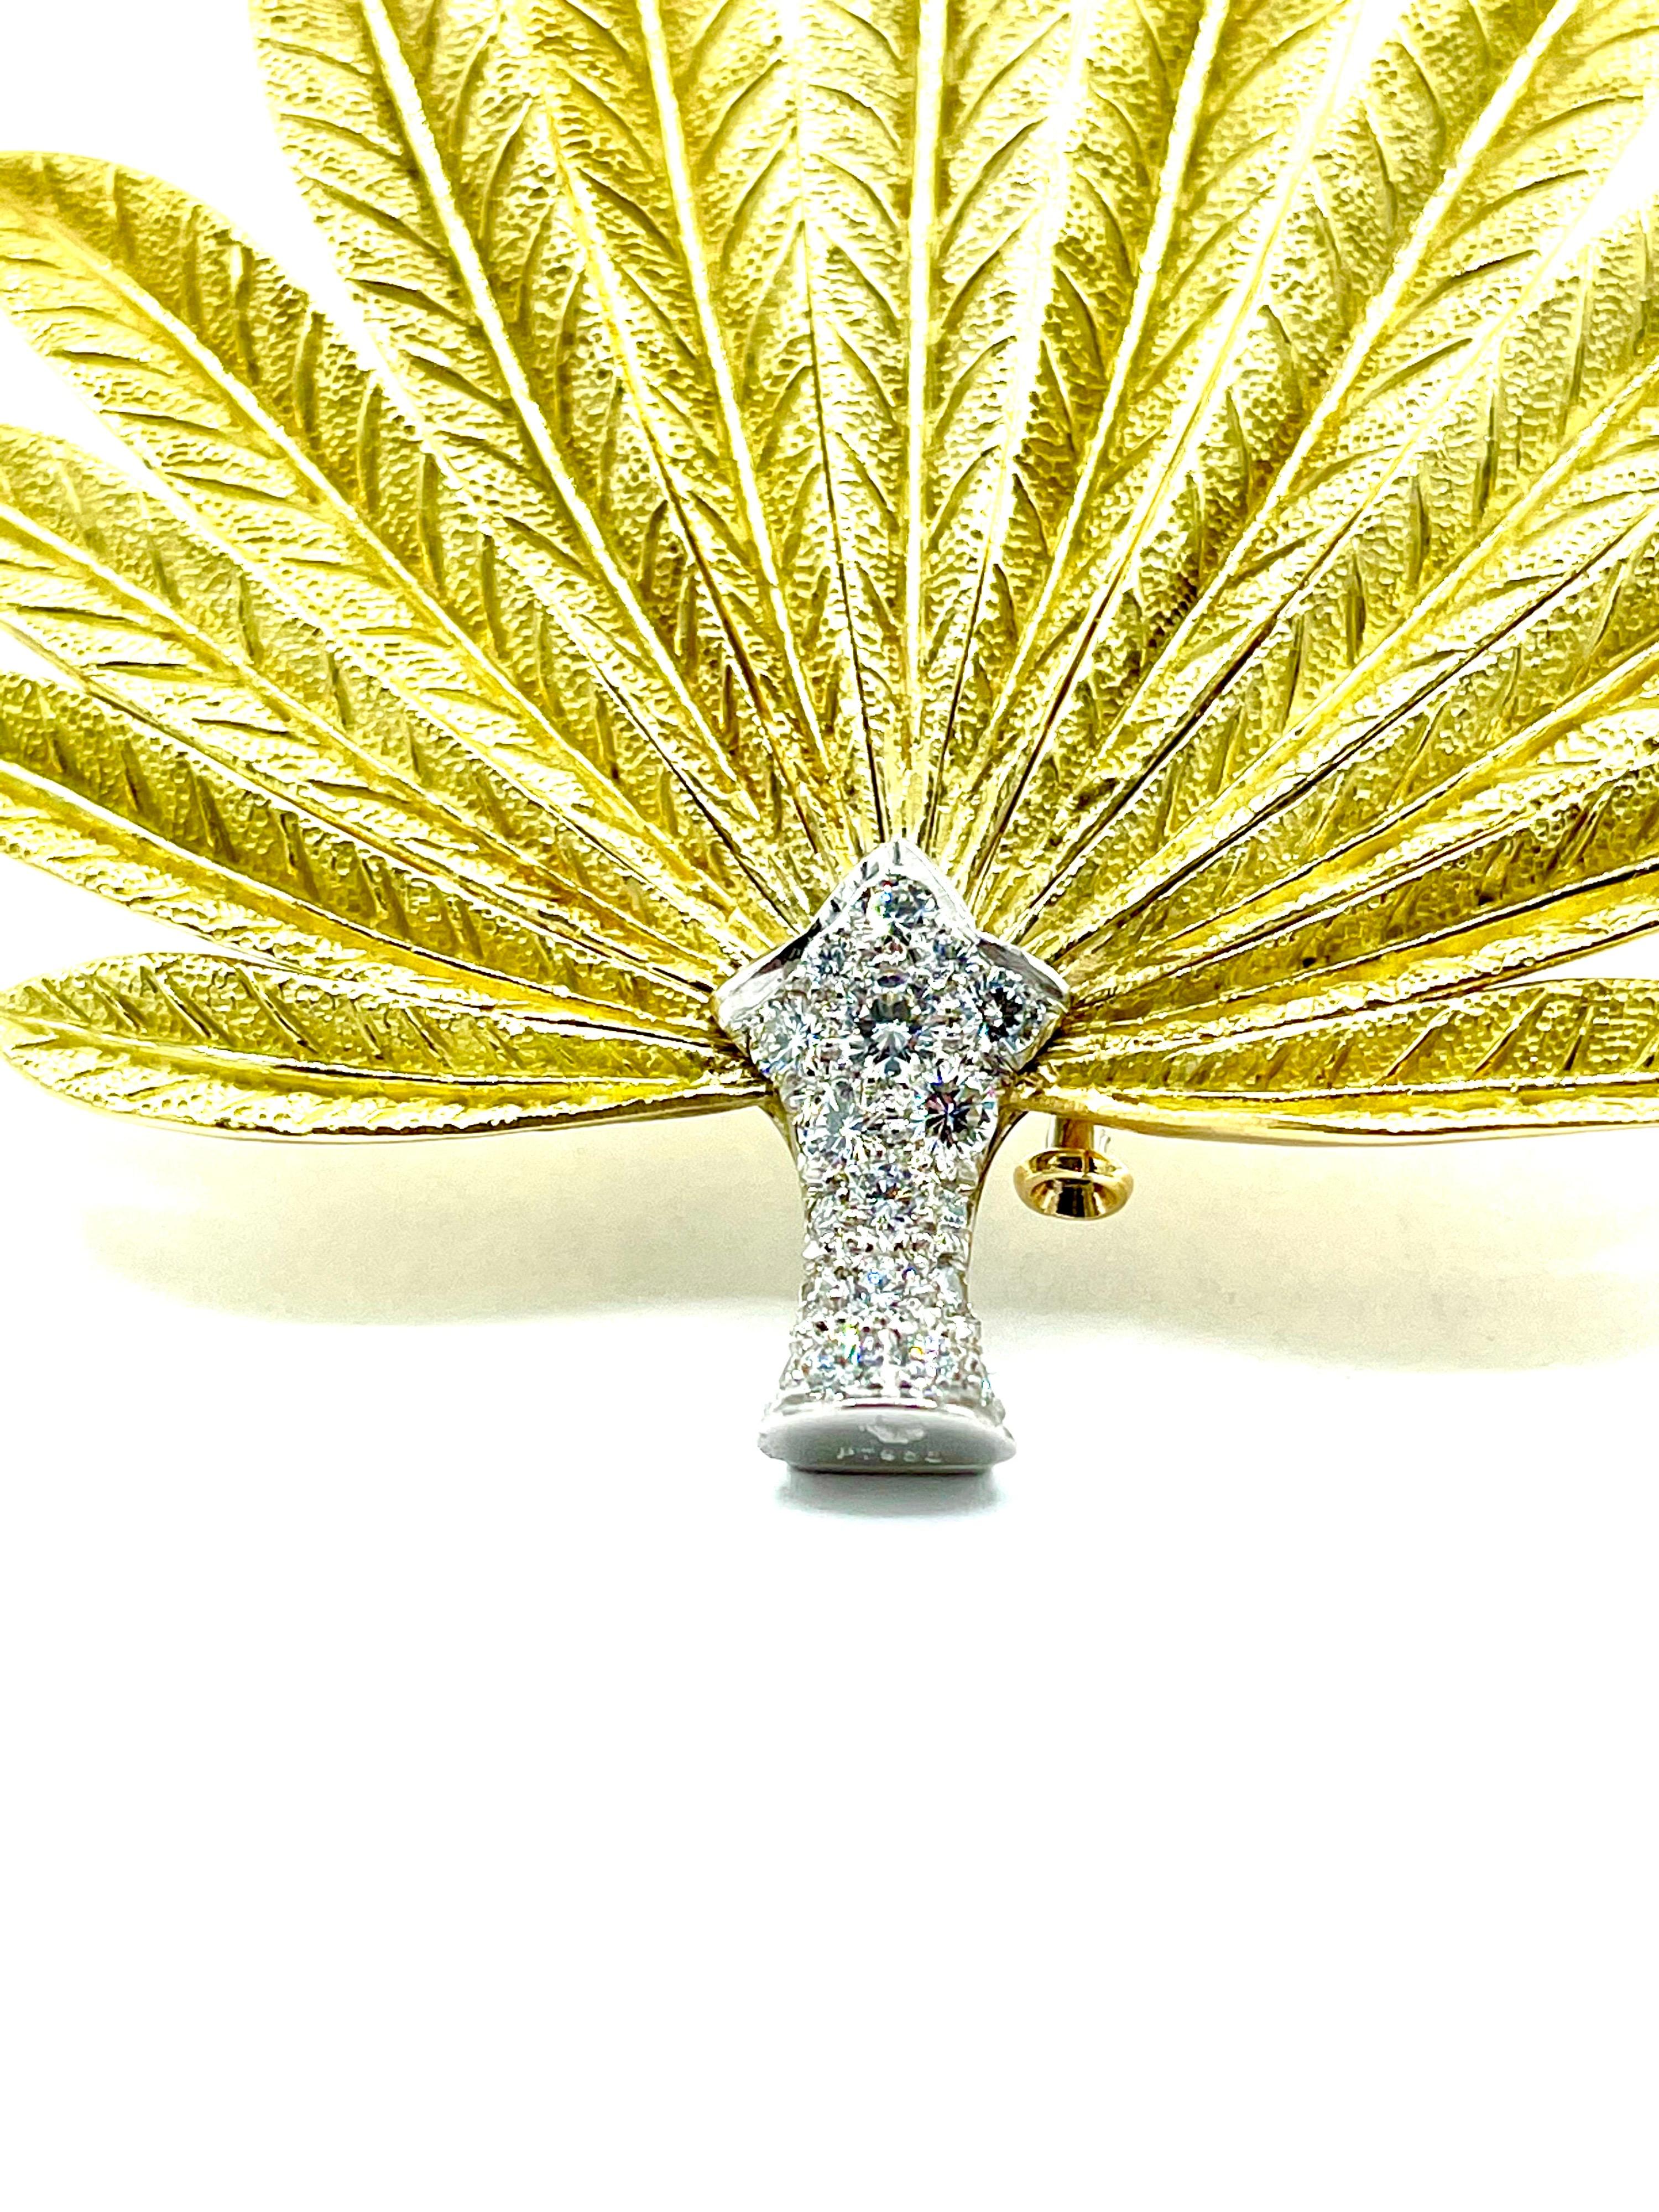 Revival 0.90 Carat Round Brilliant Diamond and 18K Gold & Platinum Feathered Fan Brooch For Sale